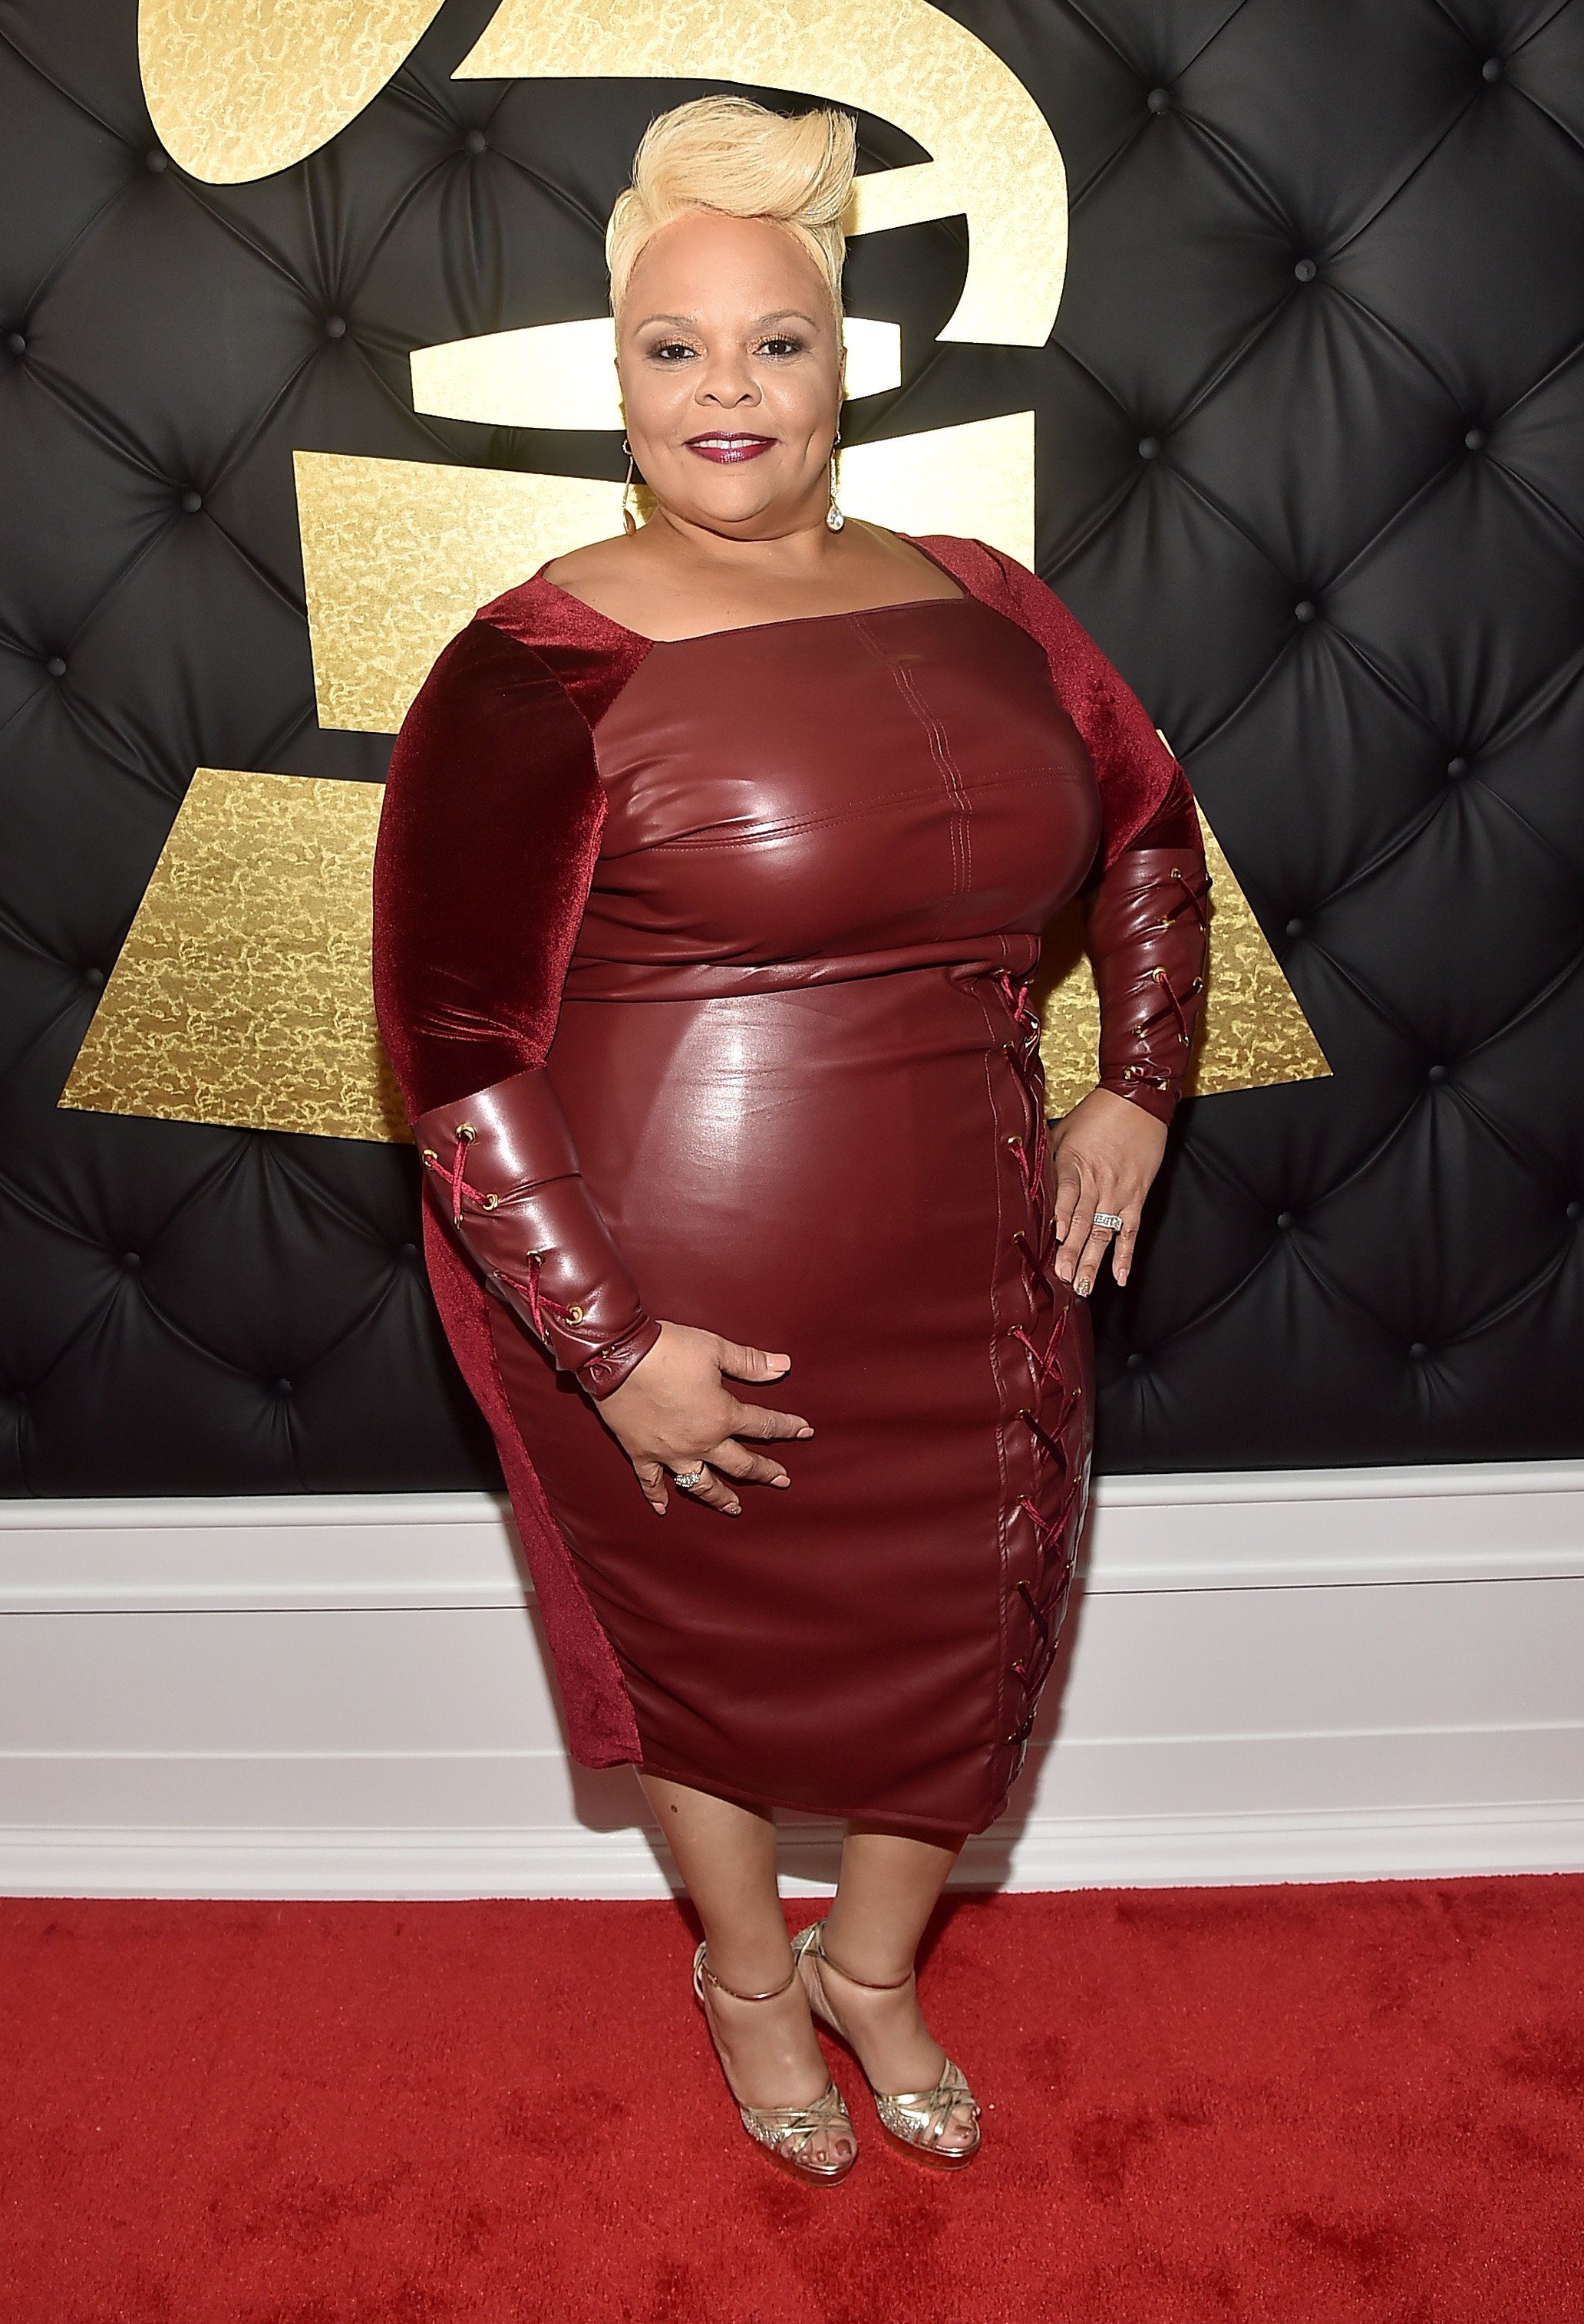 Tamela Mann at the 59th Grammy Awards at Staples Center on February 12, 2017 in Los Angeles, California. | Source: Getty Images